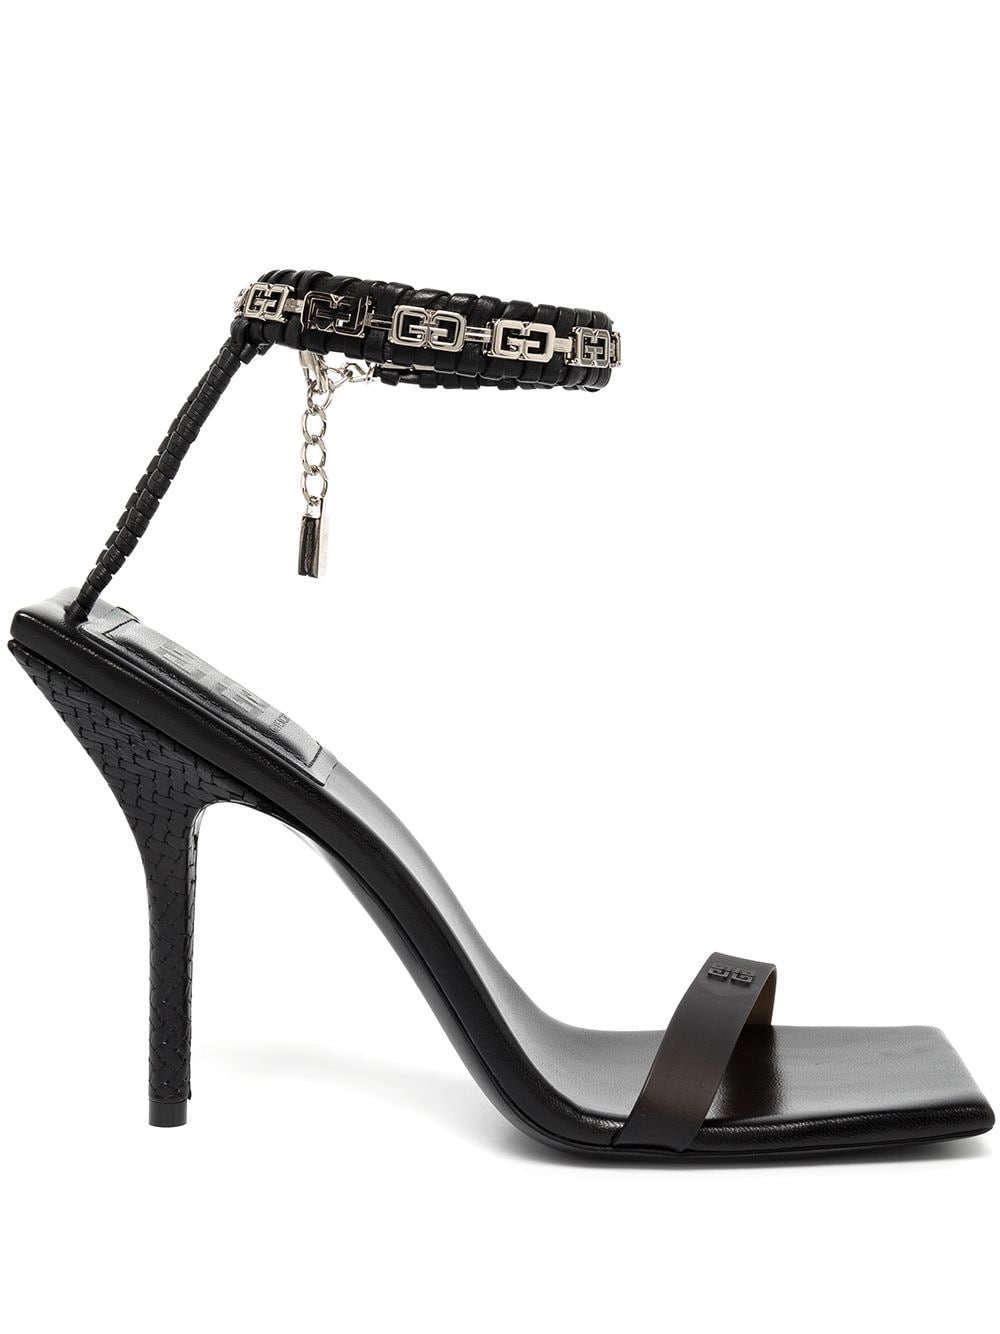 GIVENCHY 100MM BRAIDED ANKLE STRAP SANDALS